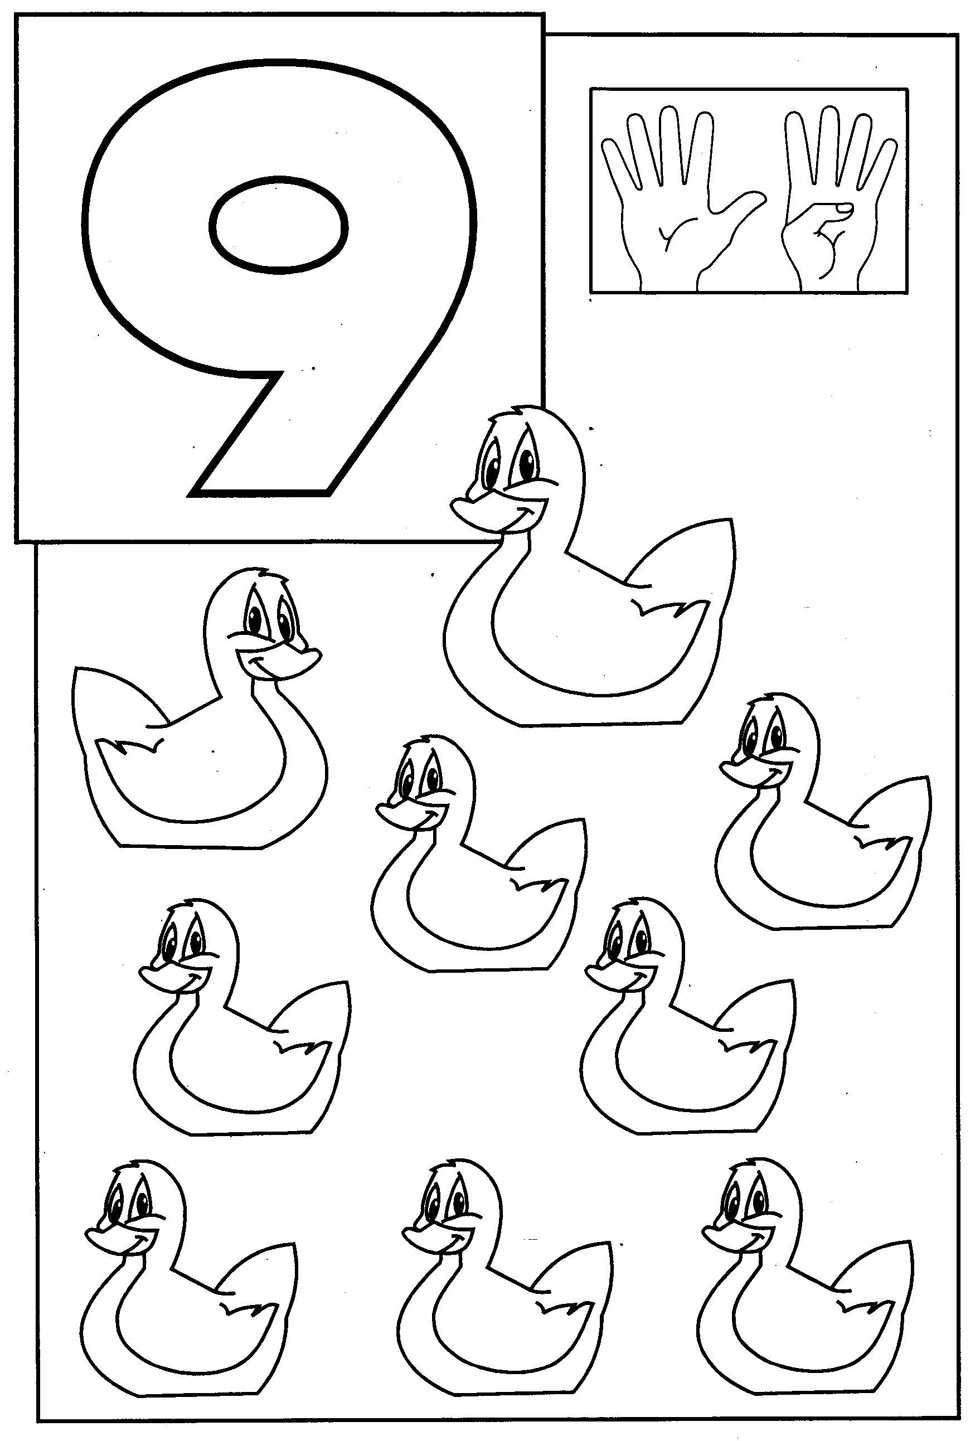 Candles Coloring Pages Fish Coloring Page Ducks Coloring Pages